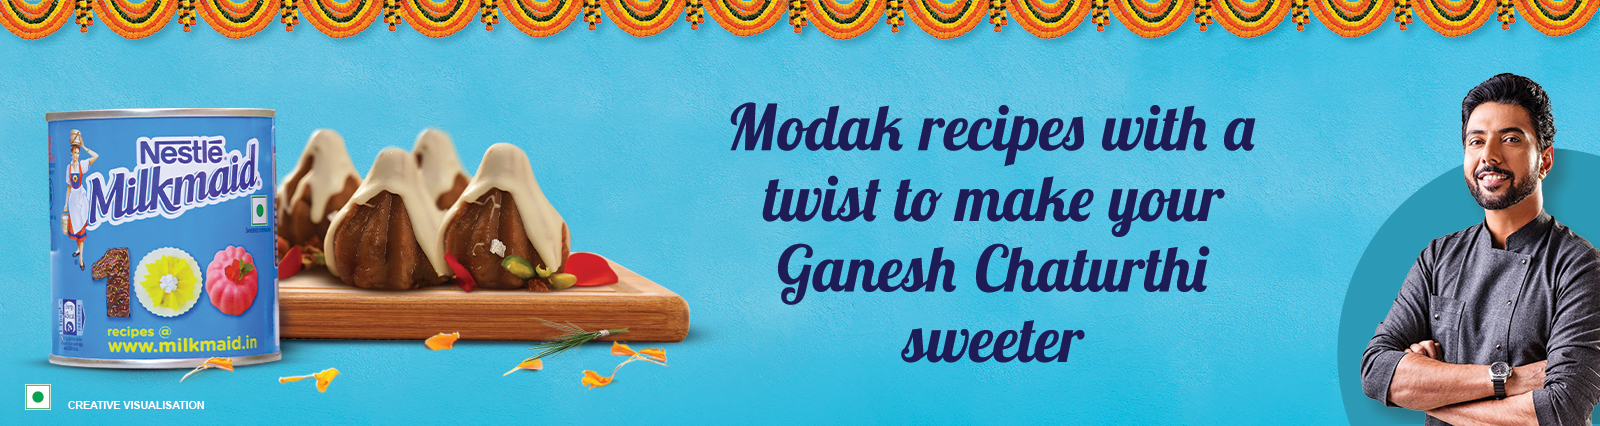 Welcome Bappa home with unique modak recipes this Ganesh Chaturthi! 